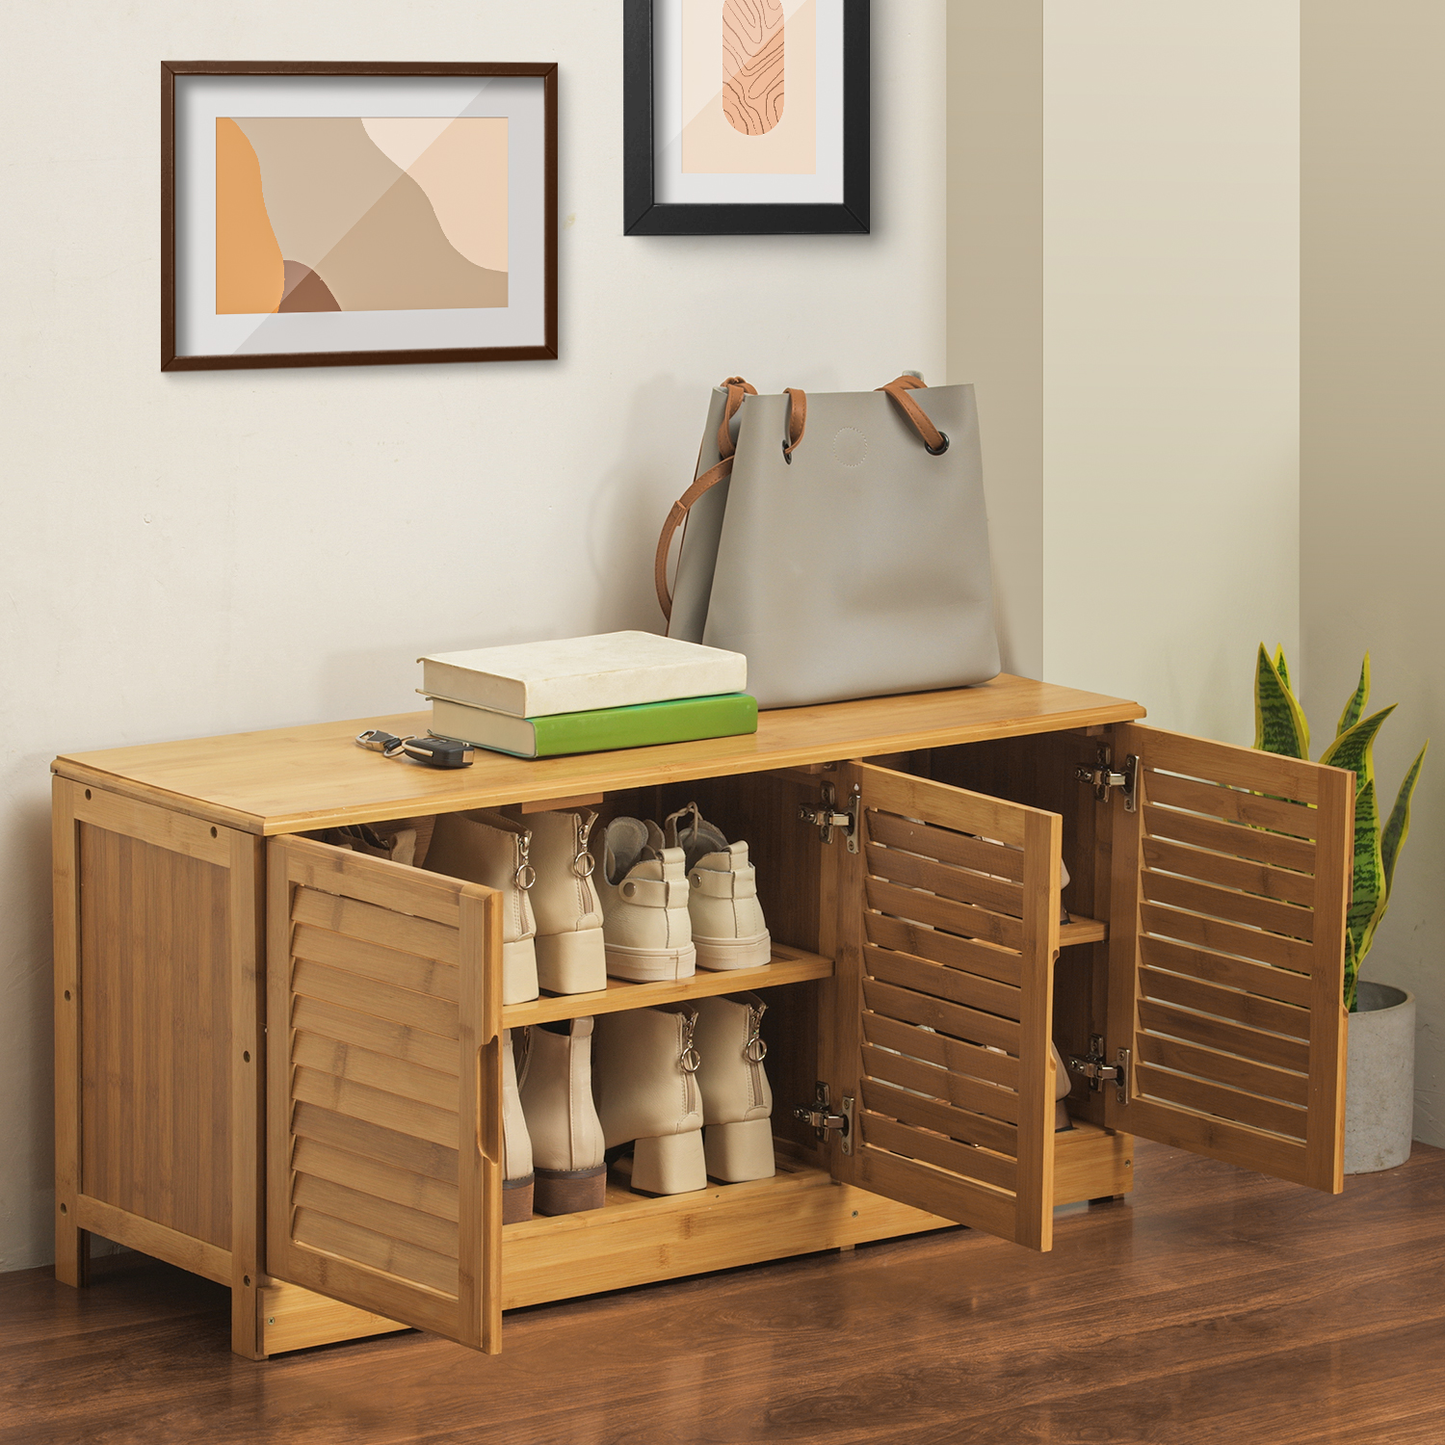 Louver Panel Shoe Changing Cabinet - 39" - Natural